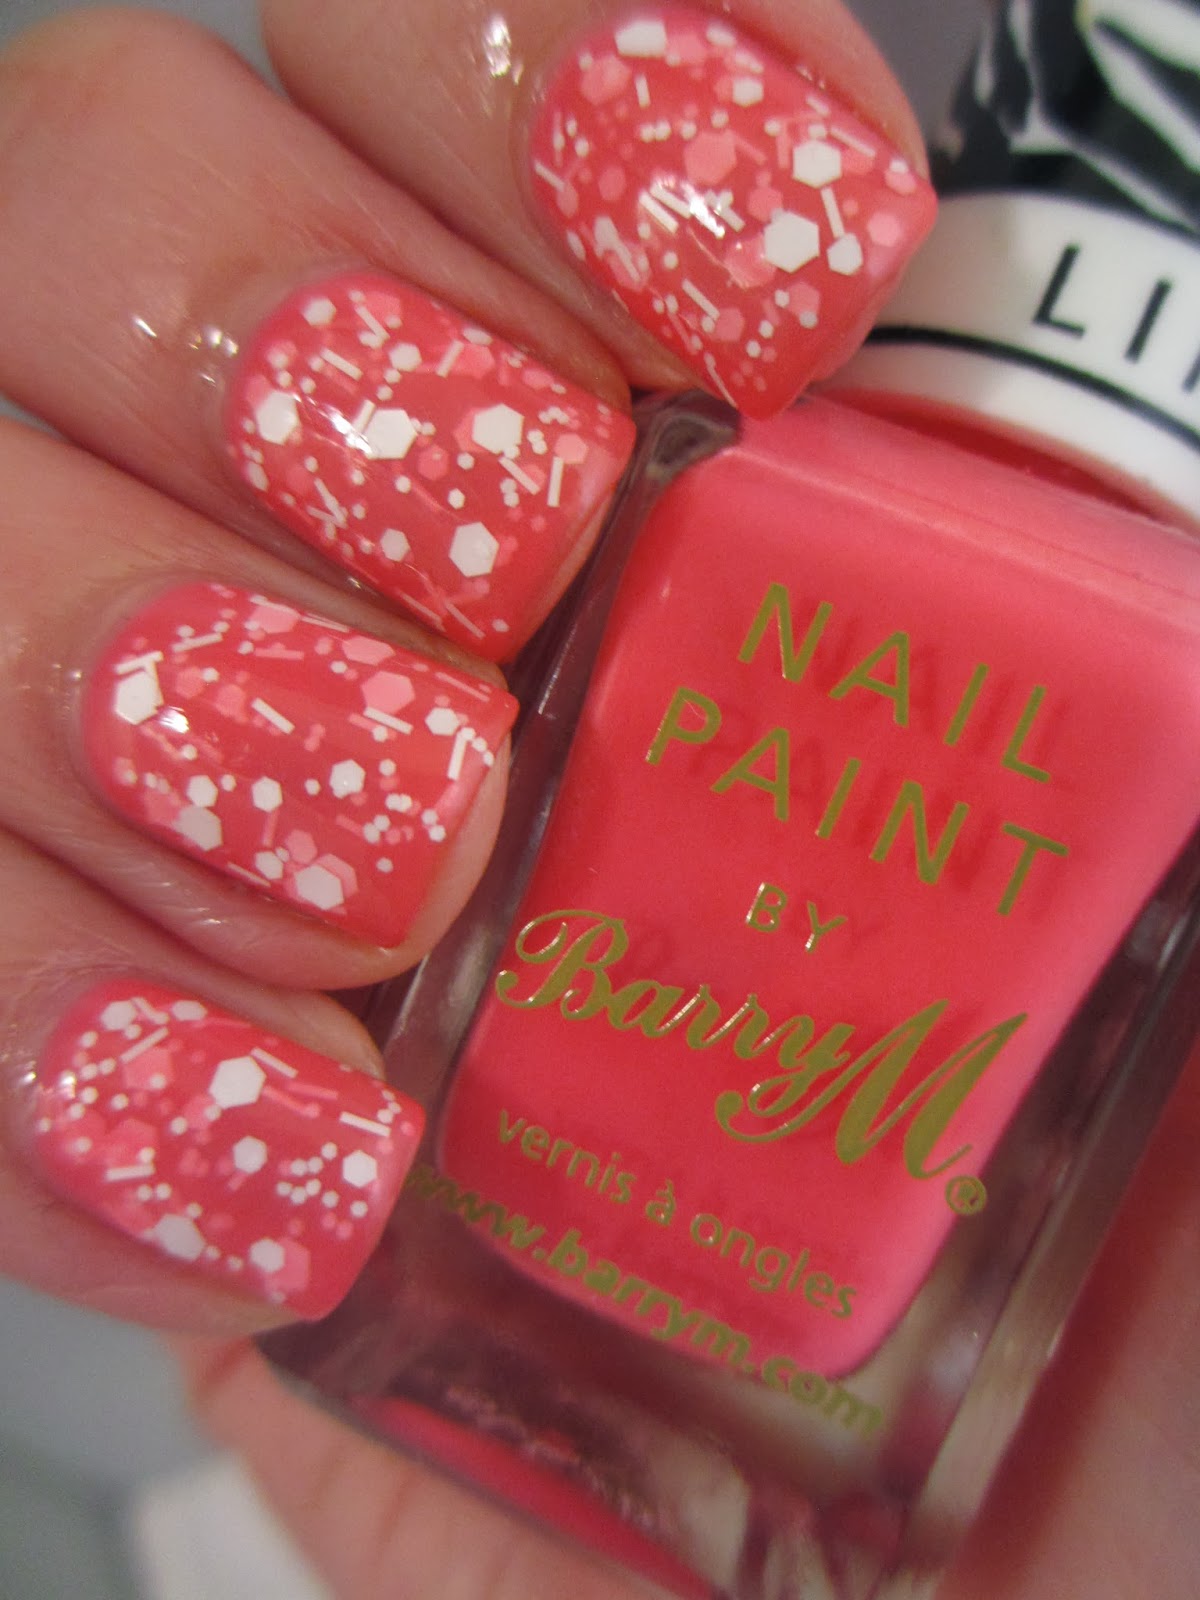 Barry-M-Special-Edition-neon-pink-Claire's-Fluffy-white-glitter-nail-polish